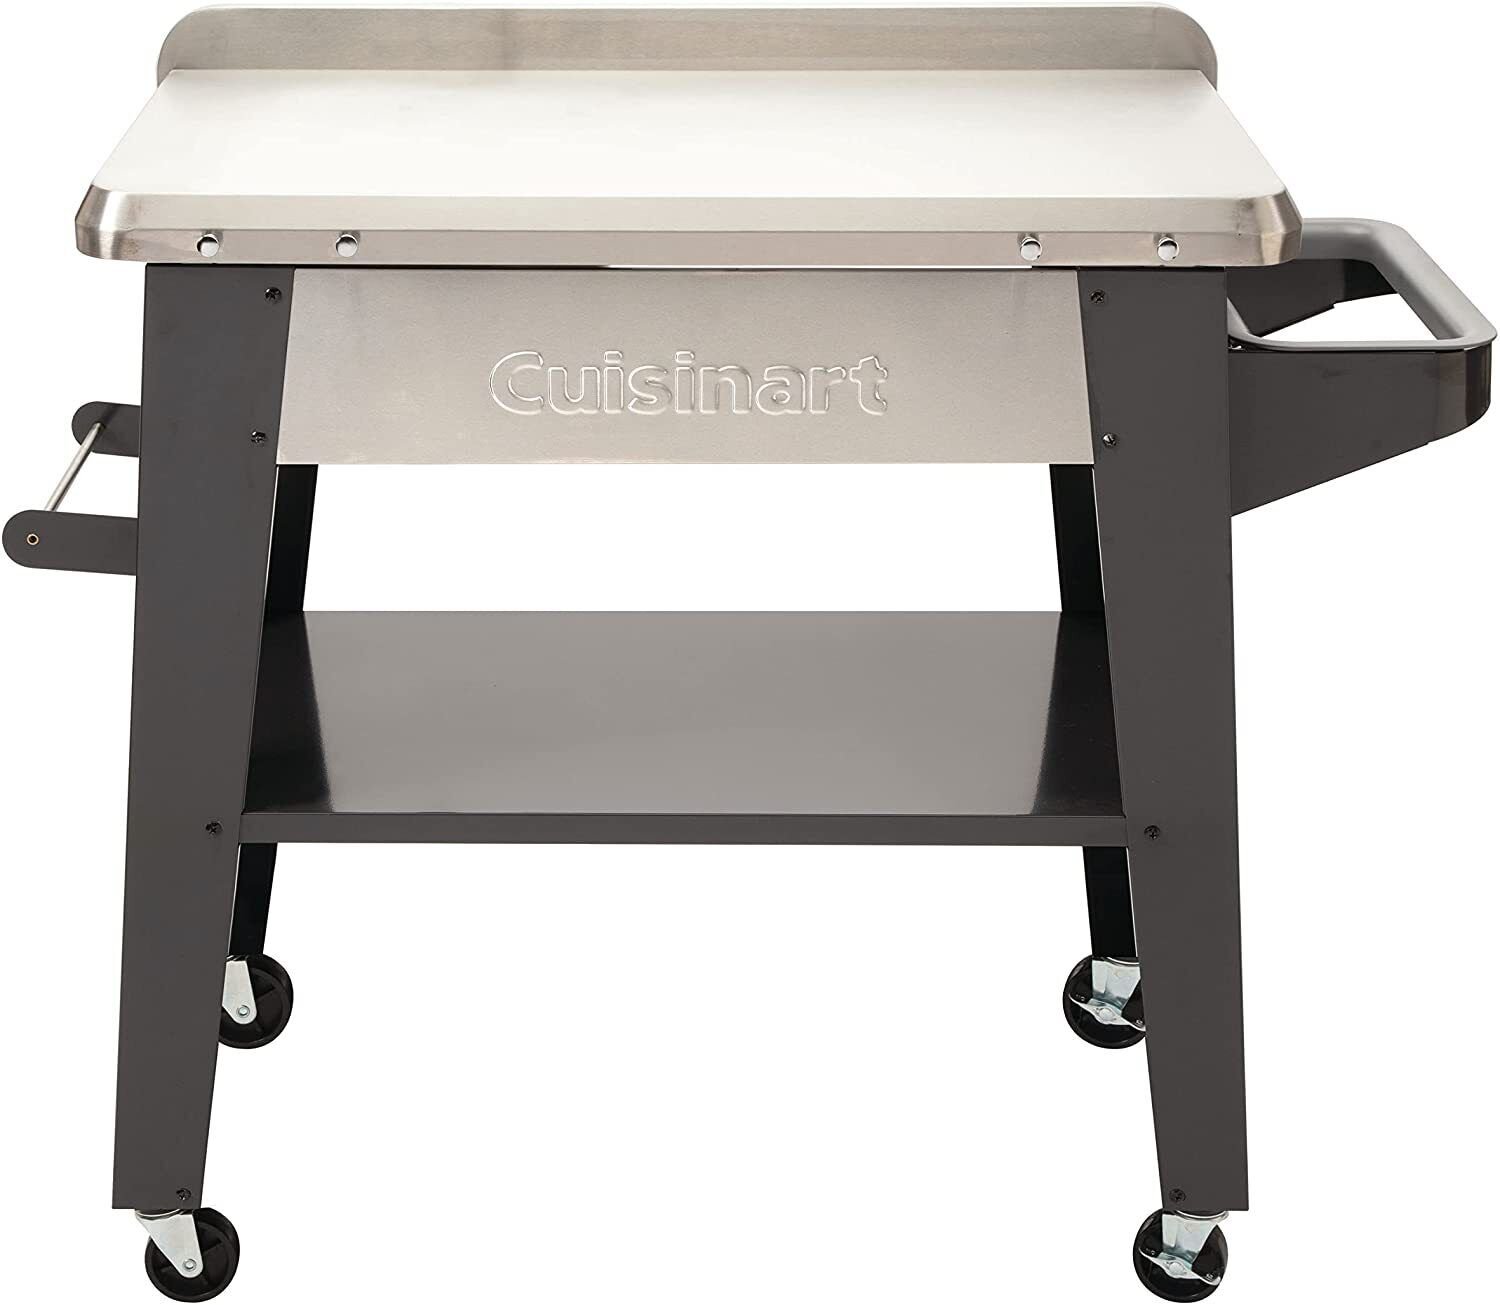 Cuisinart Stainless Steel Outdoor Prep Table